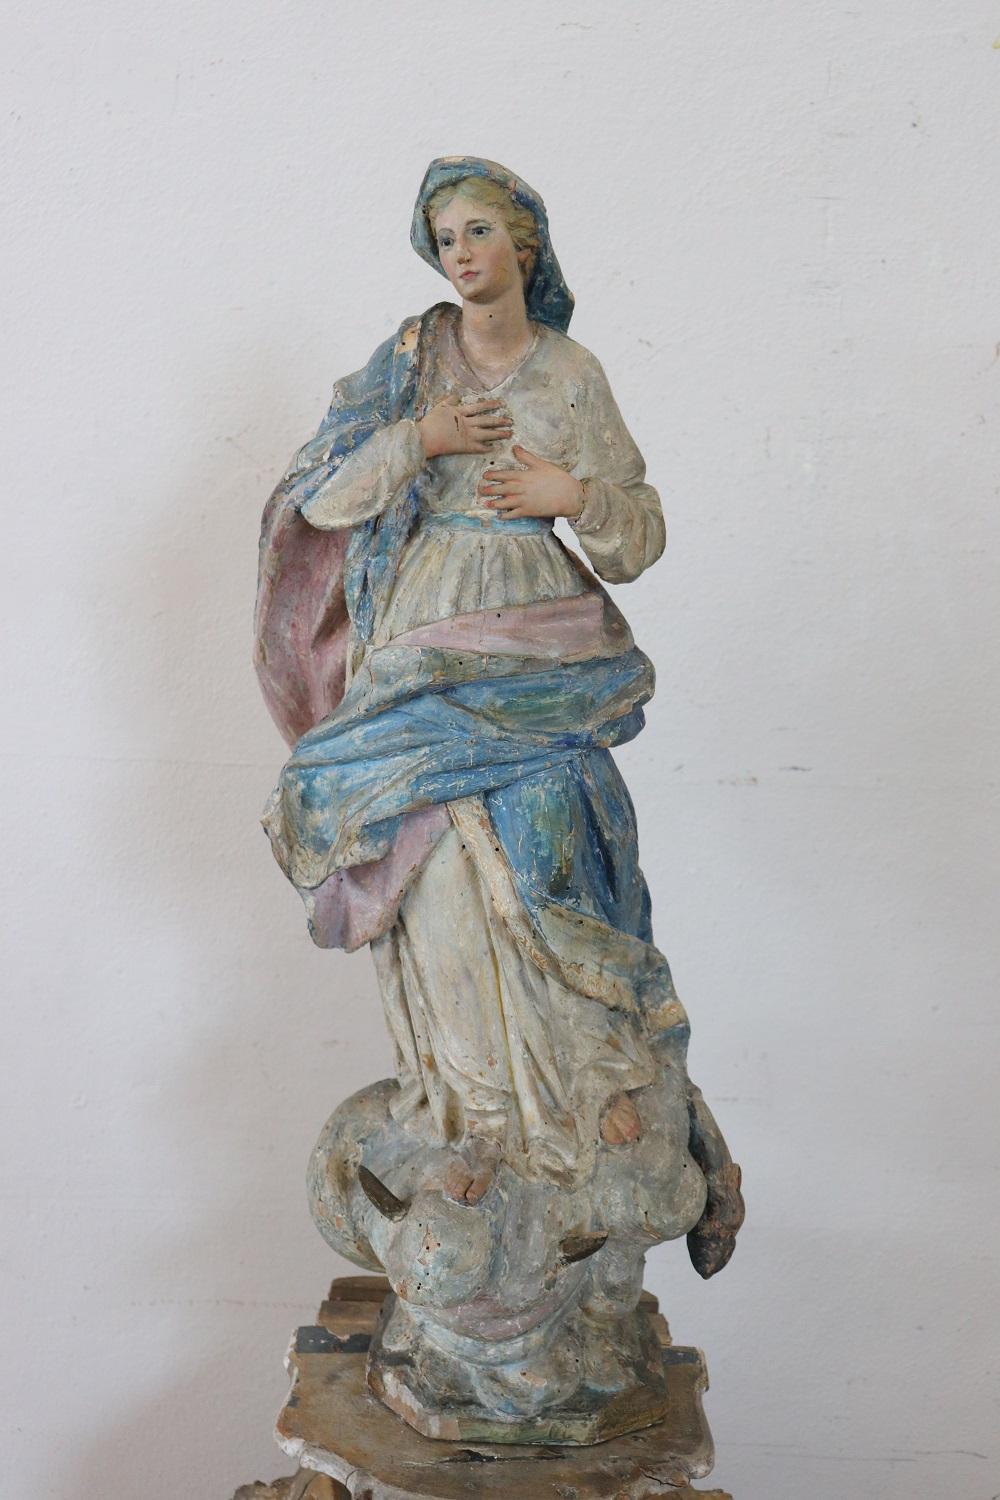 Rare antique Virgin Mary sculpture. Perfect for a collection of sacred antique items. High artistic quality of Italian sculpture. Made entirely of hand carved and painted wood.


